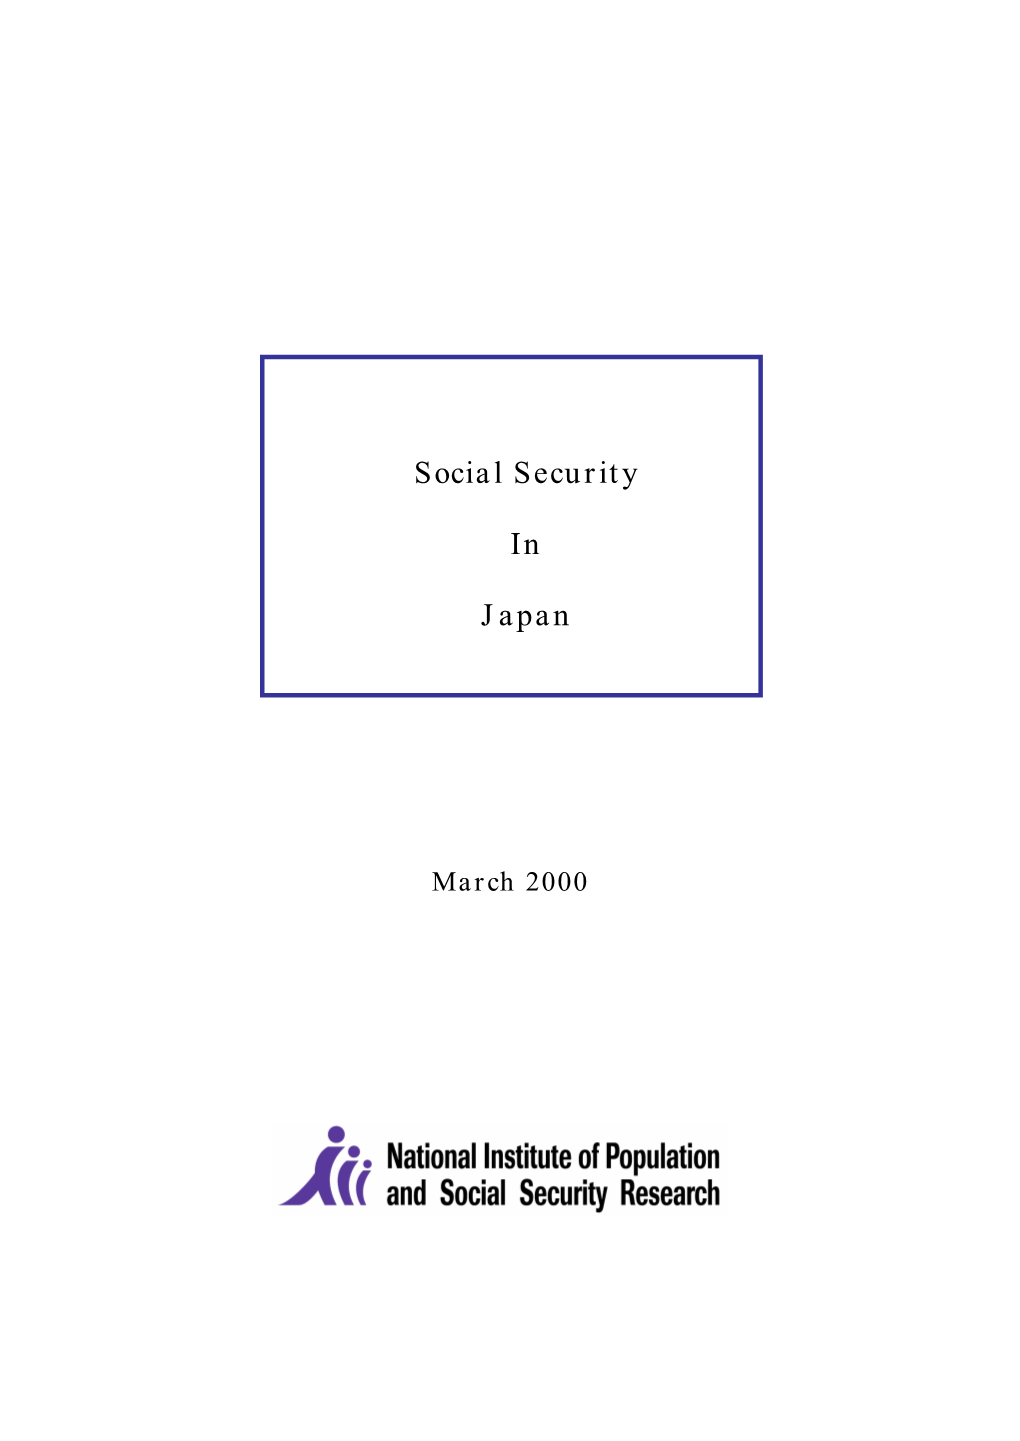 Social Security in Japan Could Be Found in Charity-Oriented Communal Activities for the Poor in a Pre-Modern Era